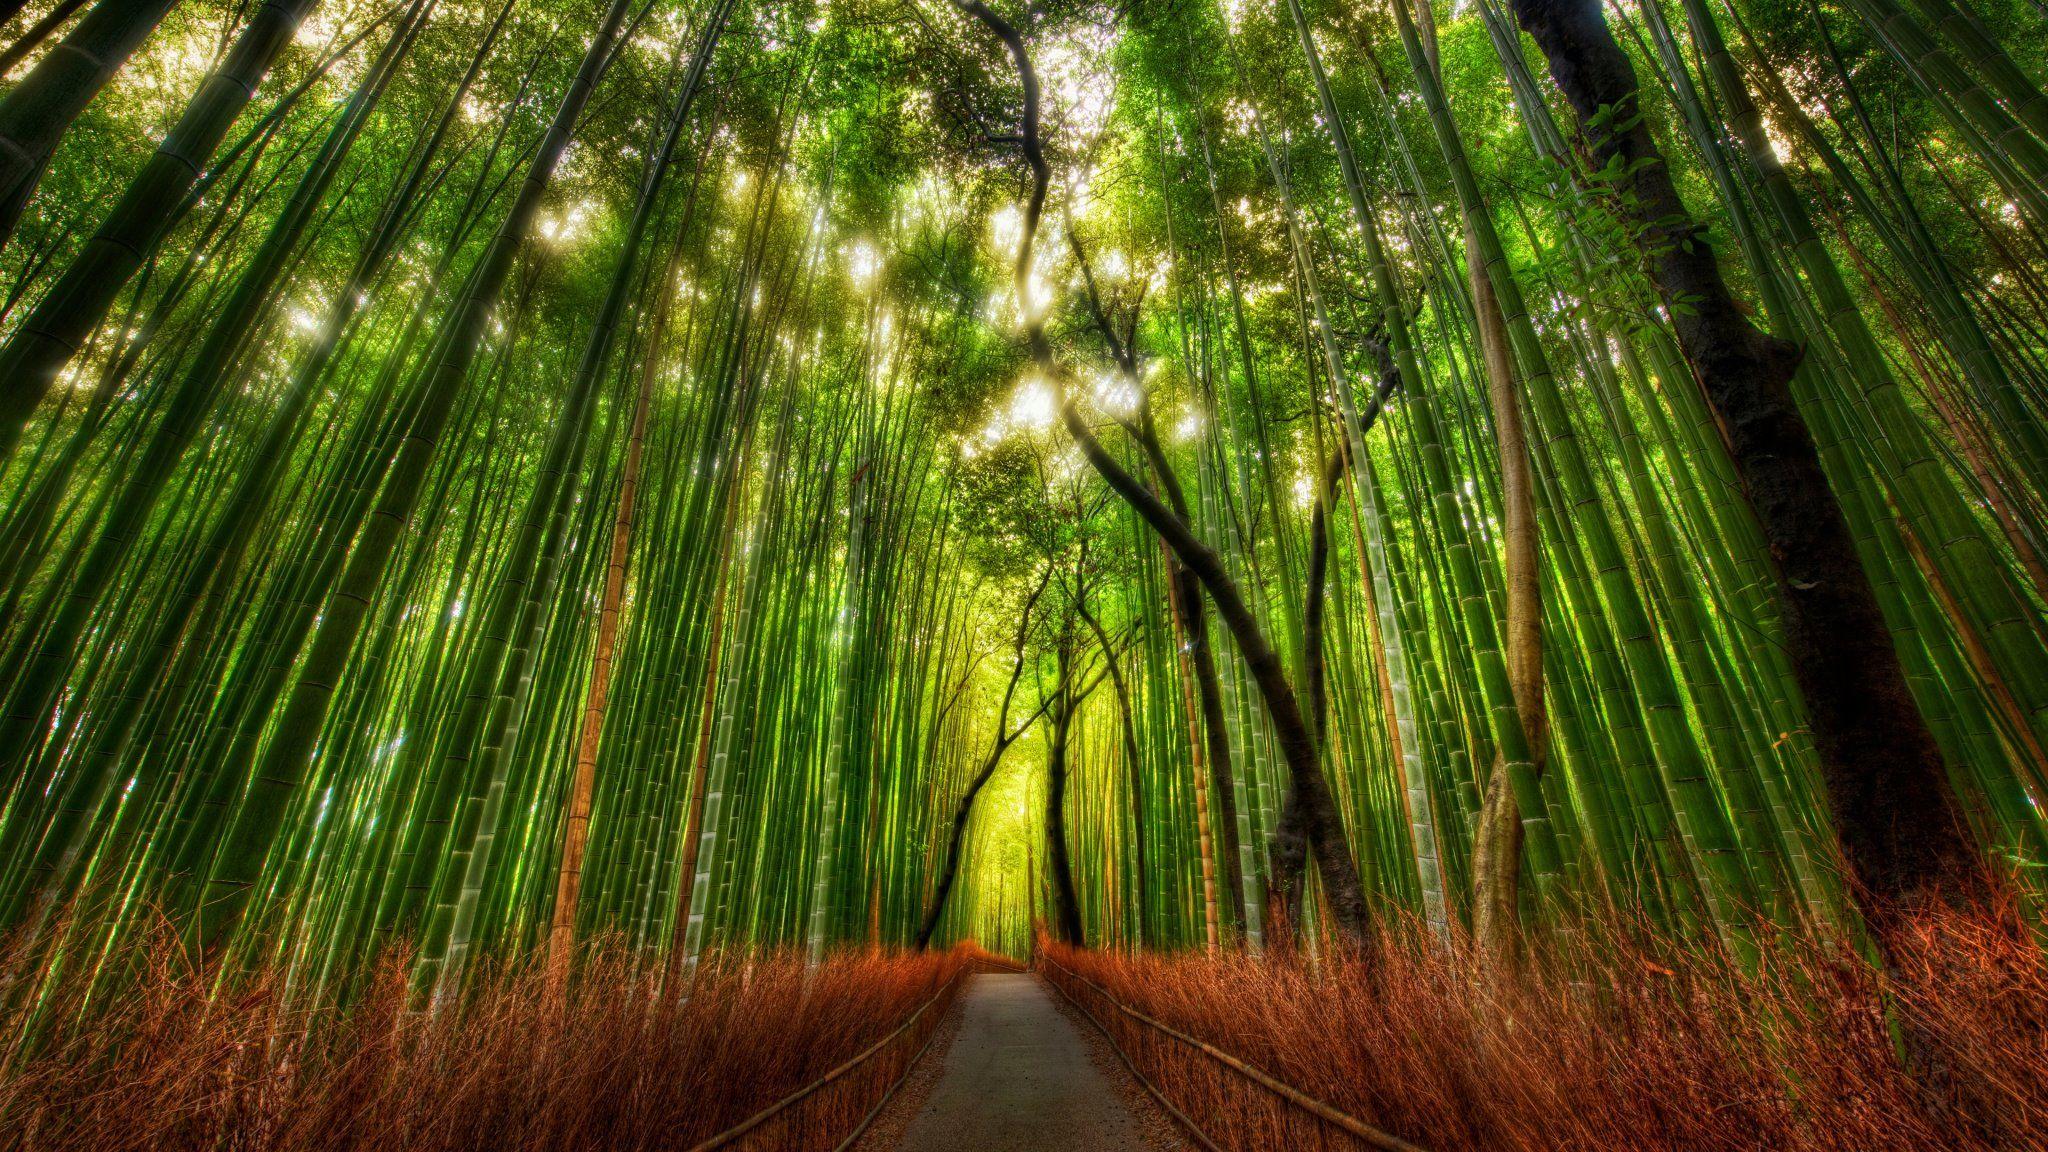 Bamboo Forest Kyoto Japan Wallpaper HD 2048x1152